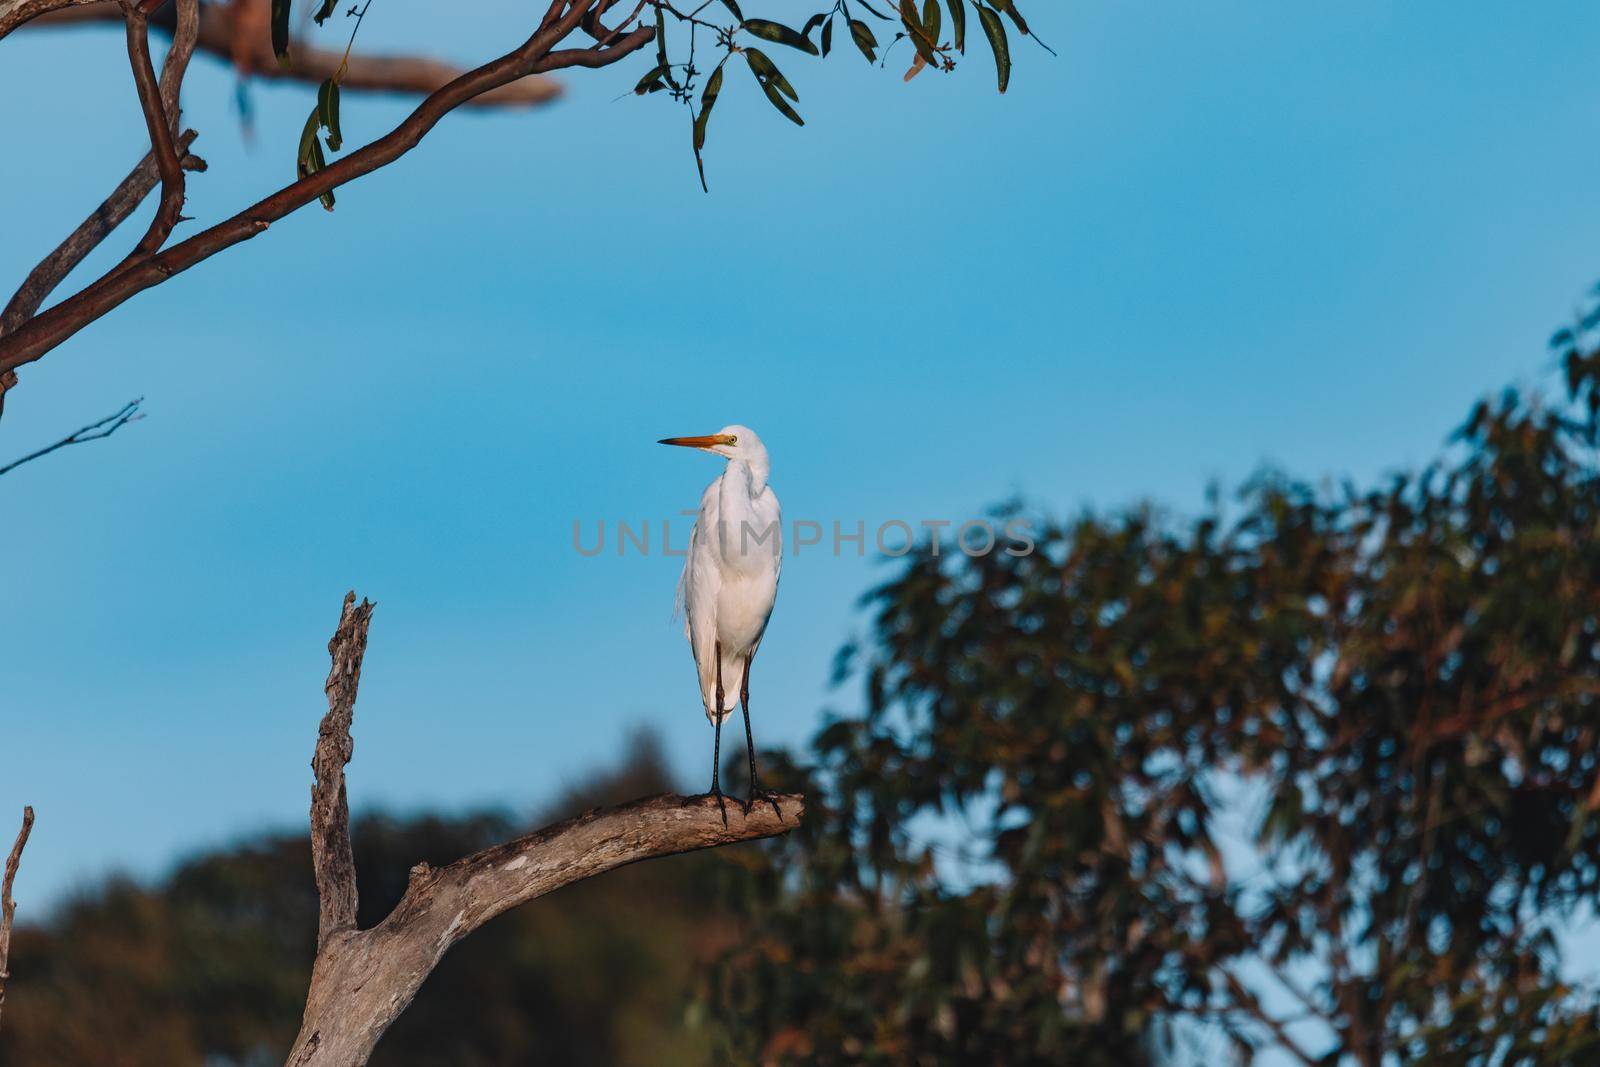 An Egret resting in the tree. High quality photo